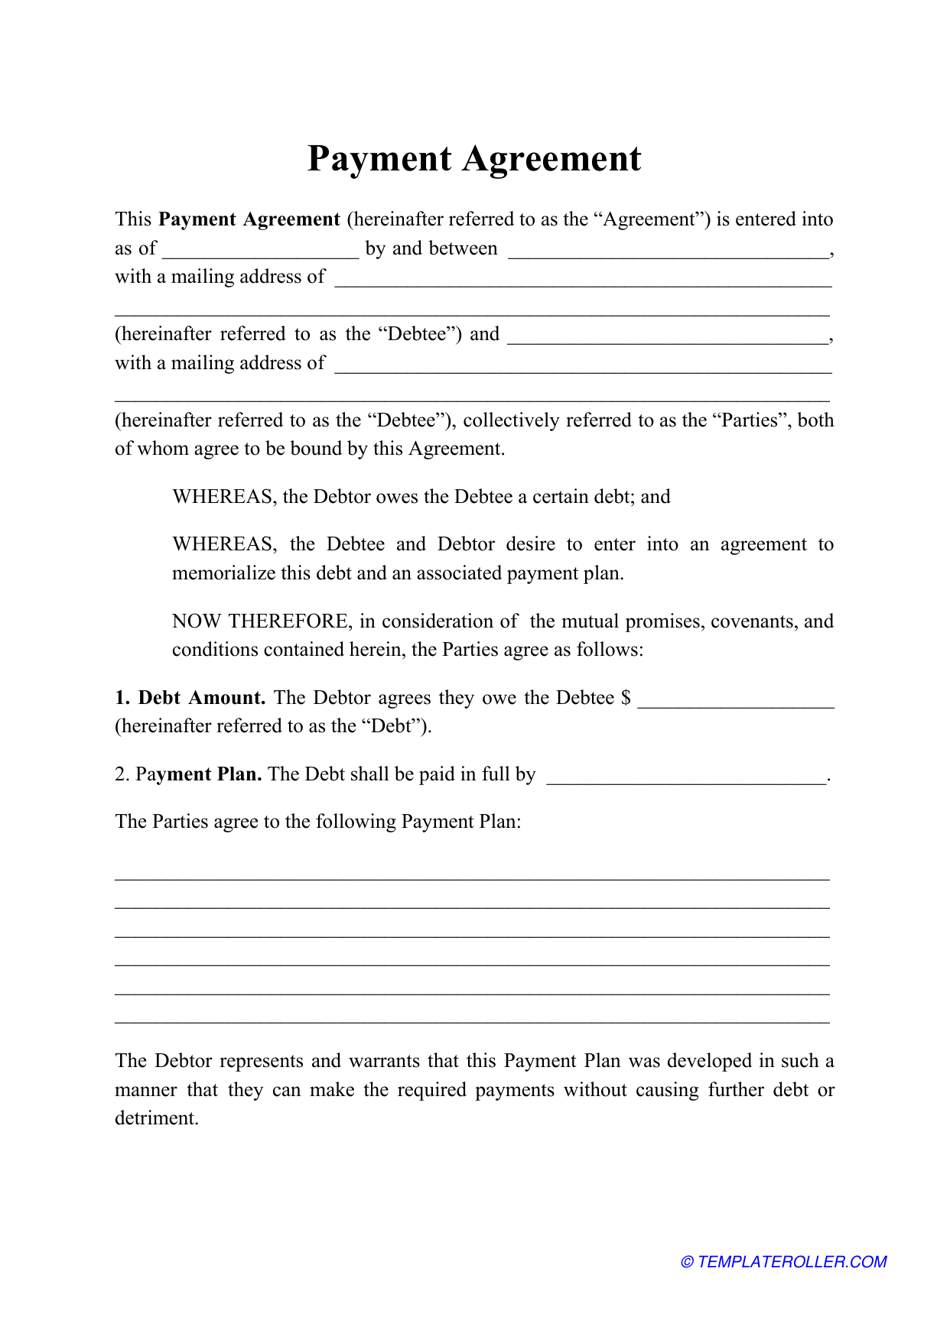 Payment Agreement Template Download Printable PDF  Templateroller In share buy back agreement template